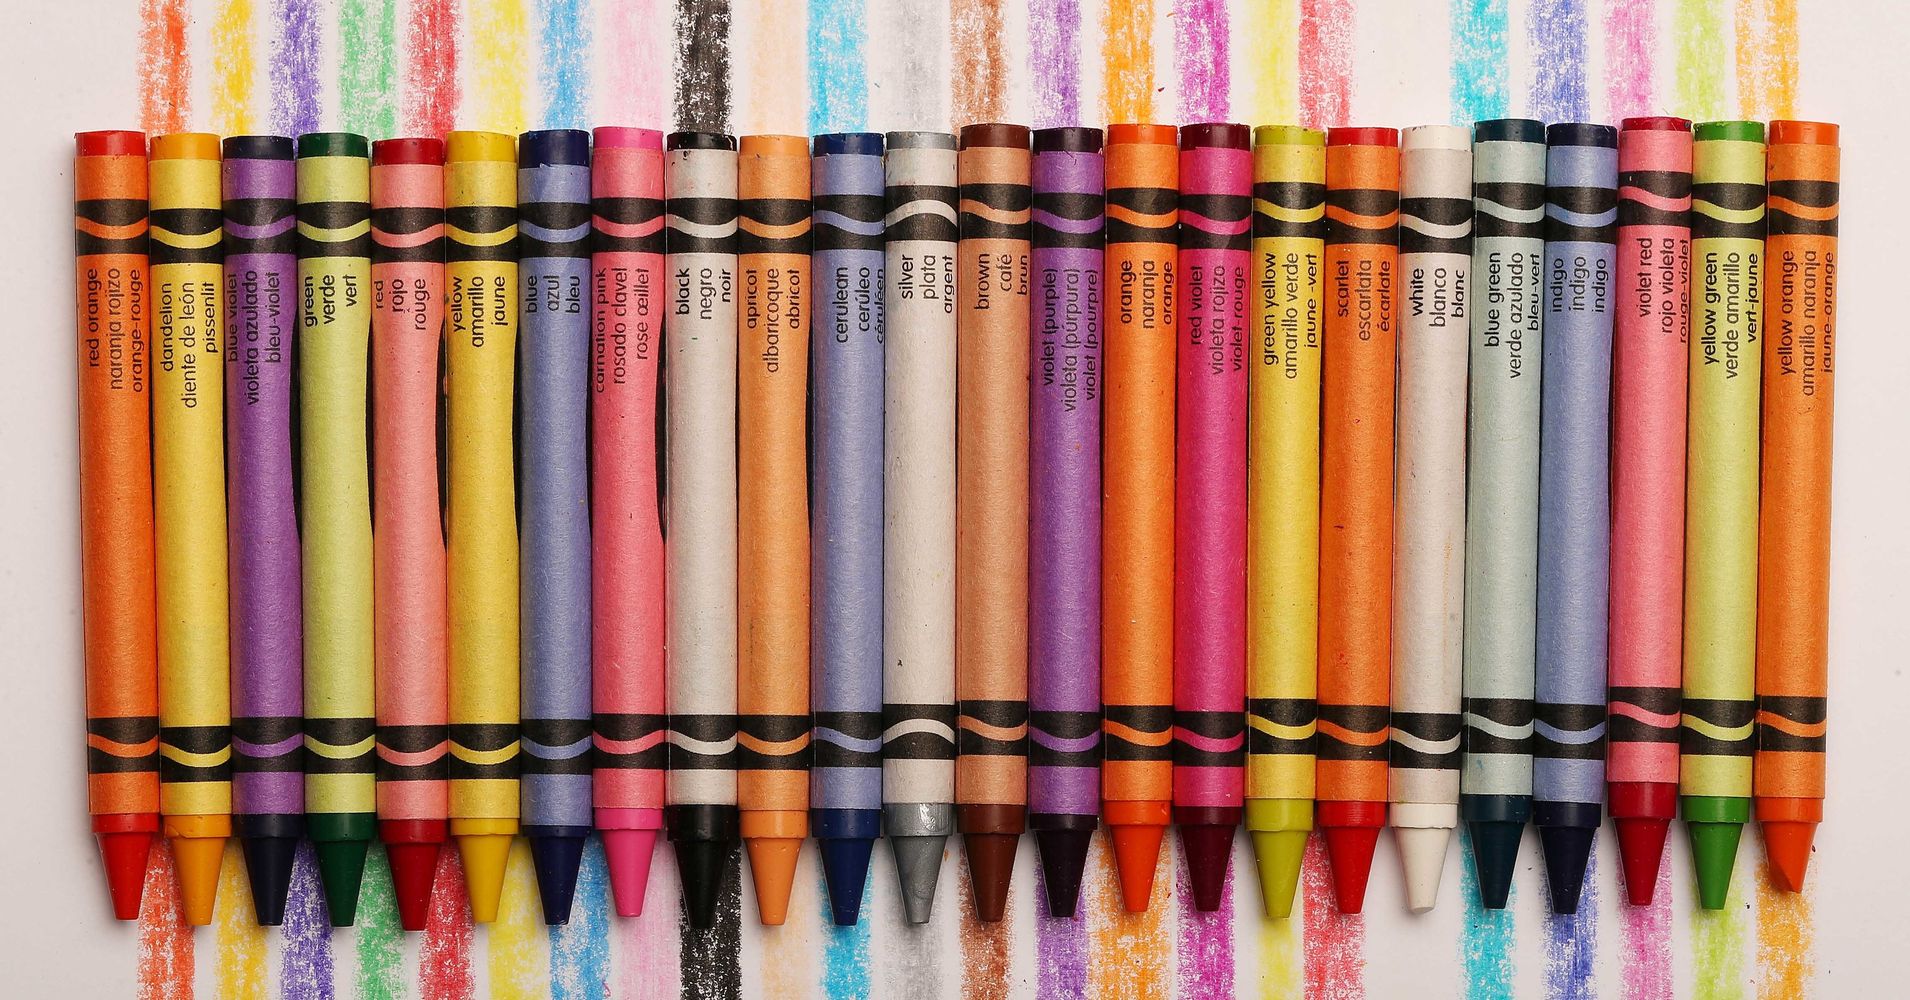 r-i-p-dandelion-the-first-crayola-crayon-to-retire-from-the-24-pack-huffpost